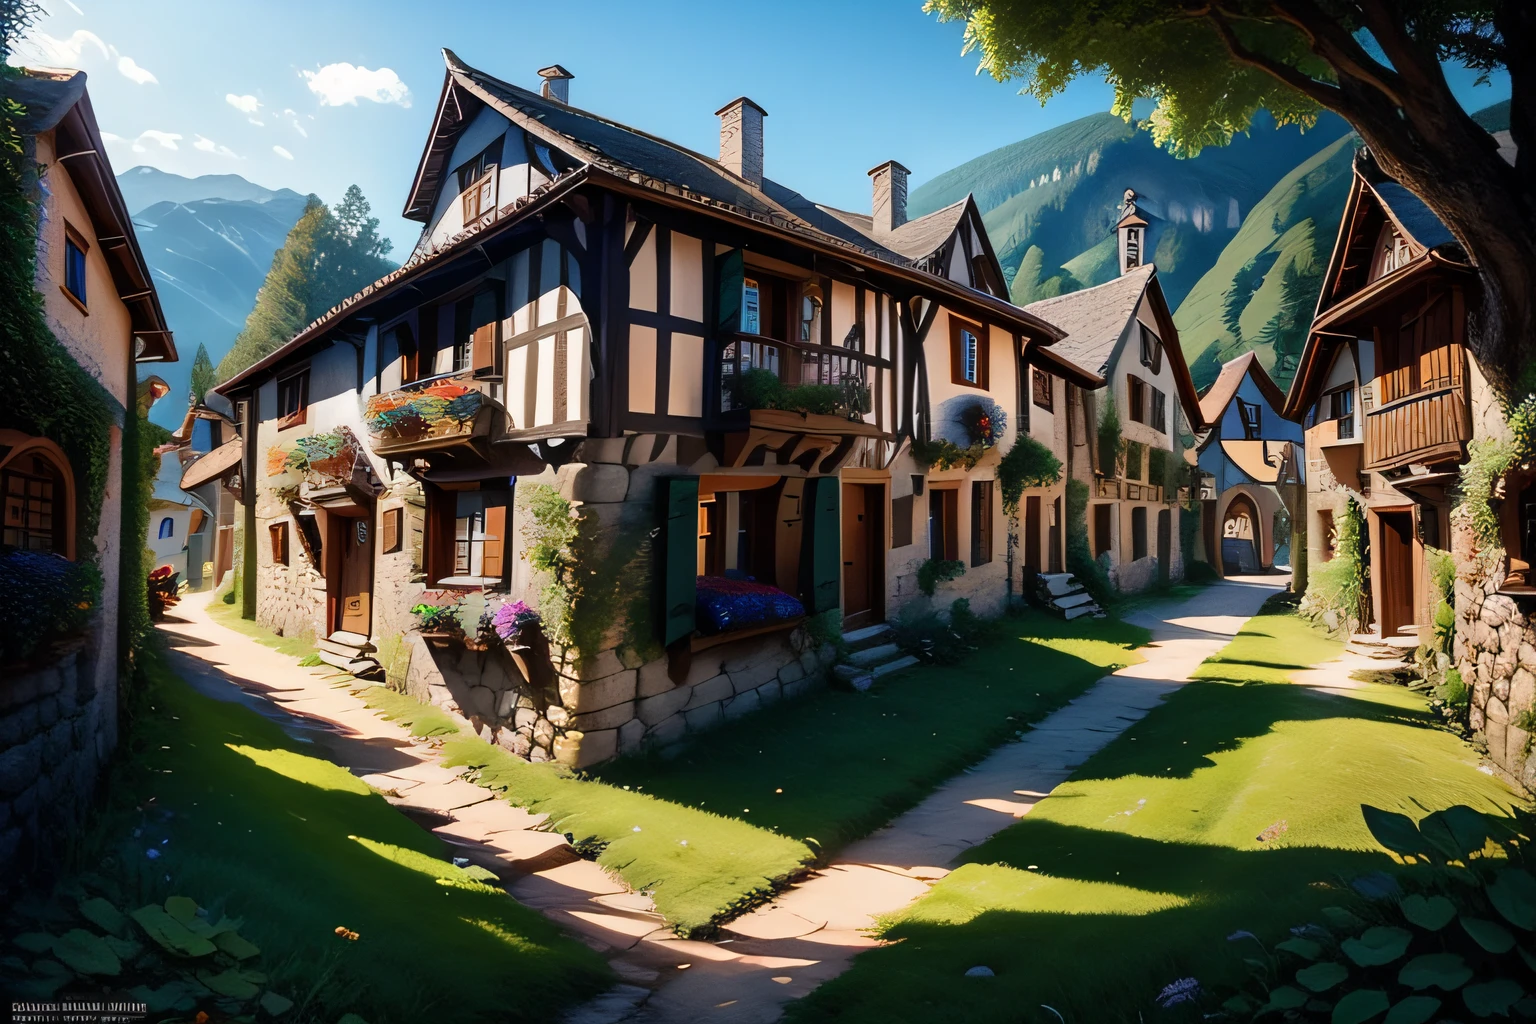 There is a small village with a lot of houses on the hill, medieval village, village in the woods, medeival fantasy town, fantasy town setting, medieval fantasy game art, medieval city, uma pequena medieval village, quaint village, medieval town landscape, medieval city, realistic fantasy rendering, villages ， engine unreal, fissure, medieval concept art, fantasy city